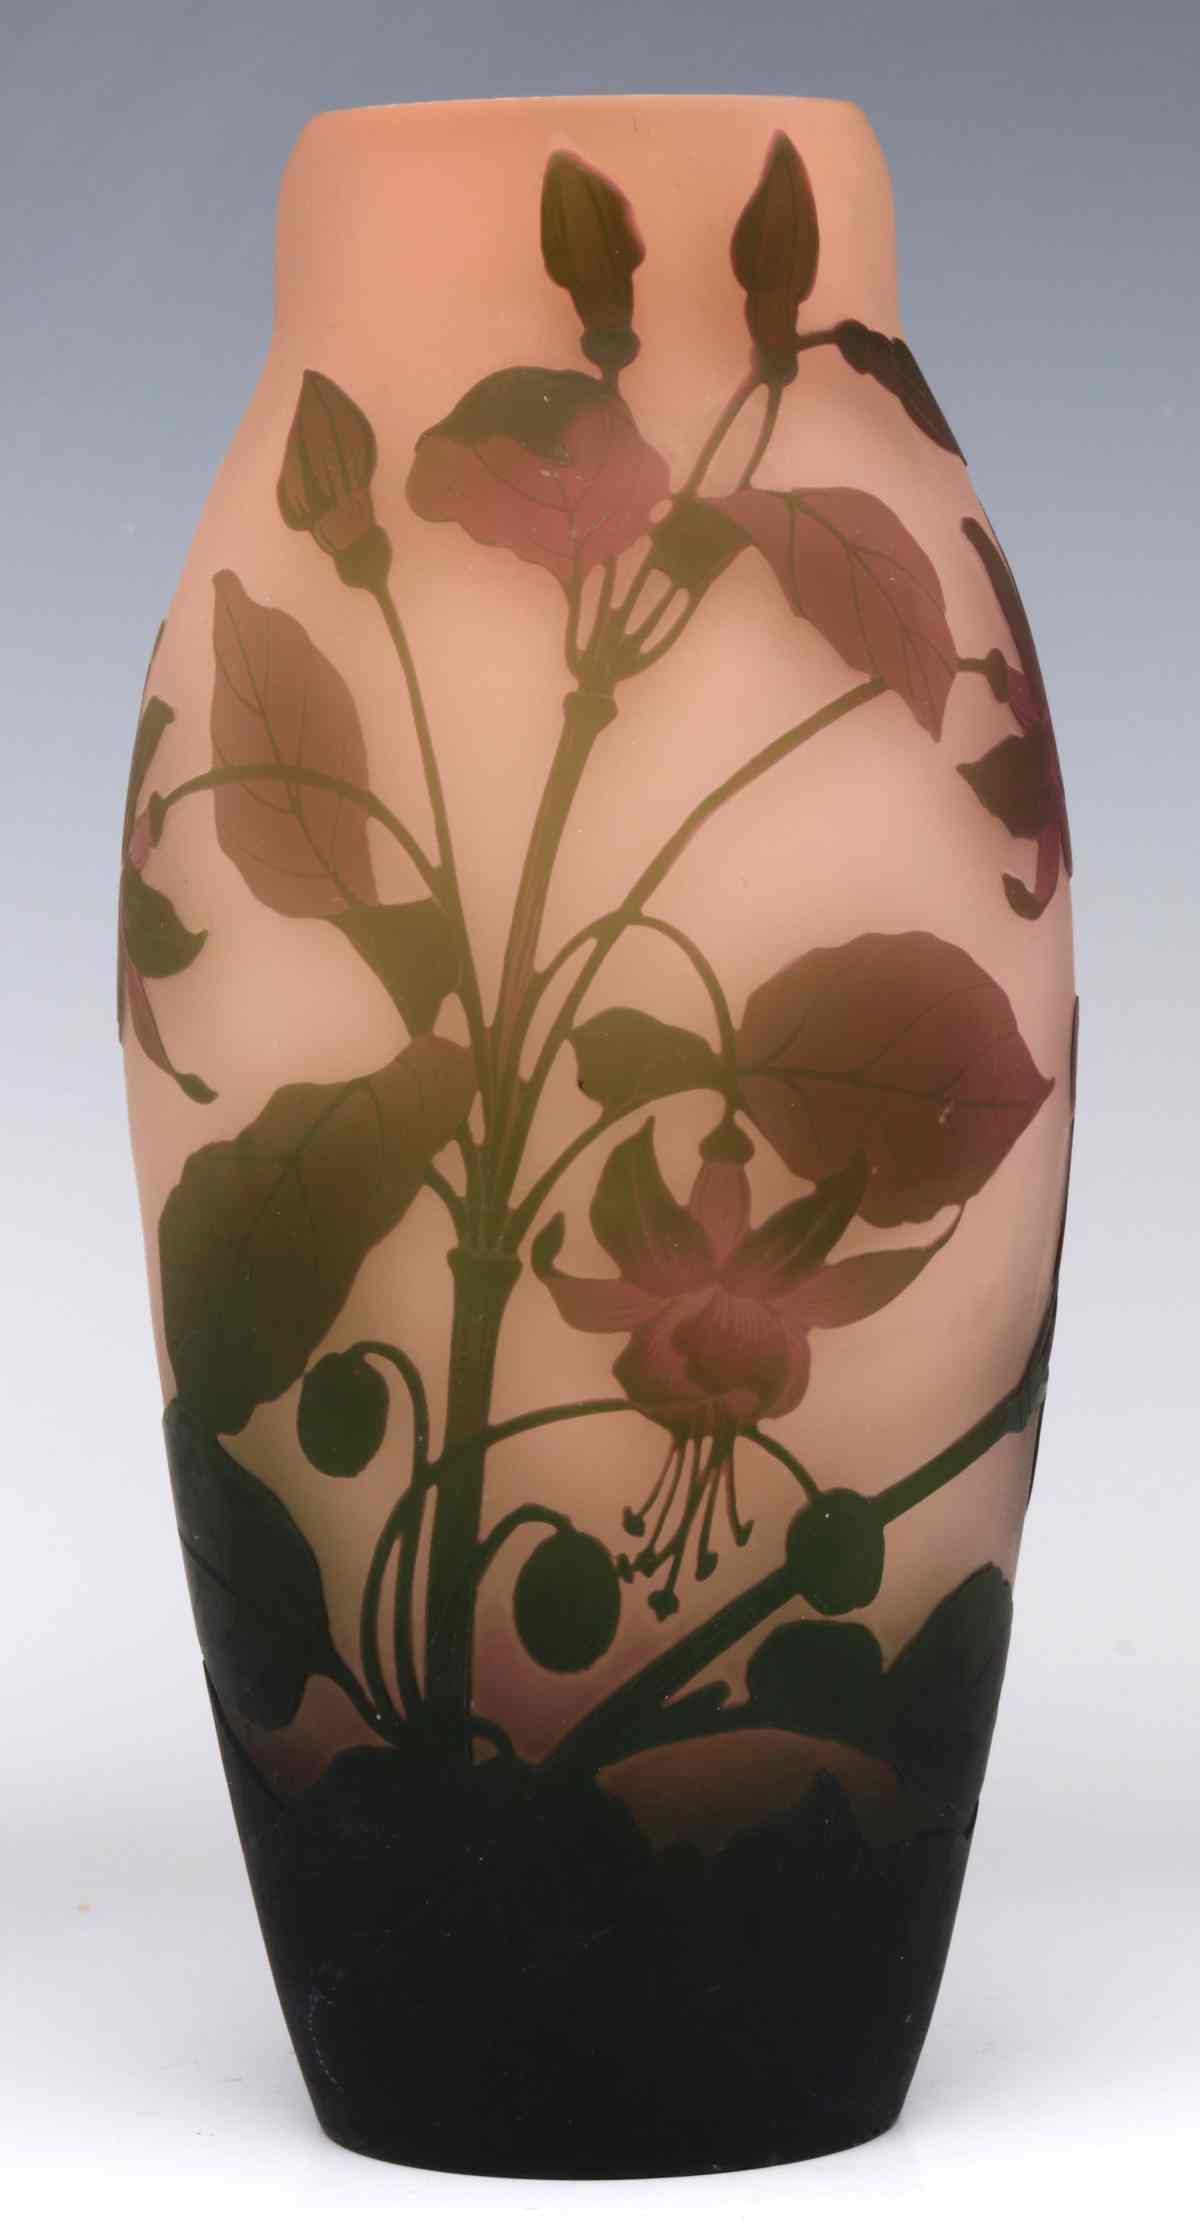 A FRENCH CAMEO GLASS VASE SIGNED ARSALL